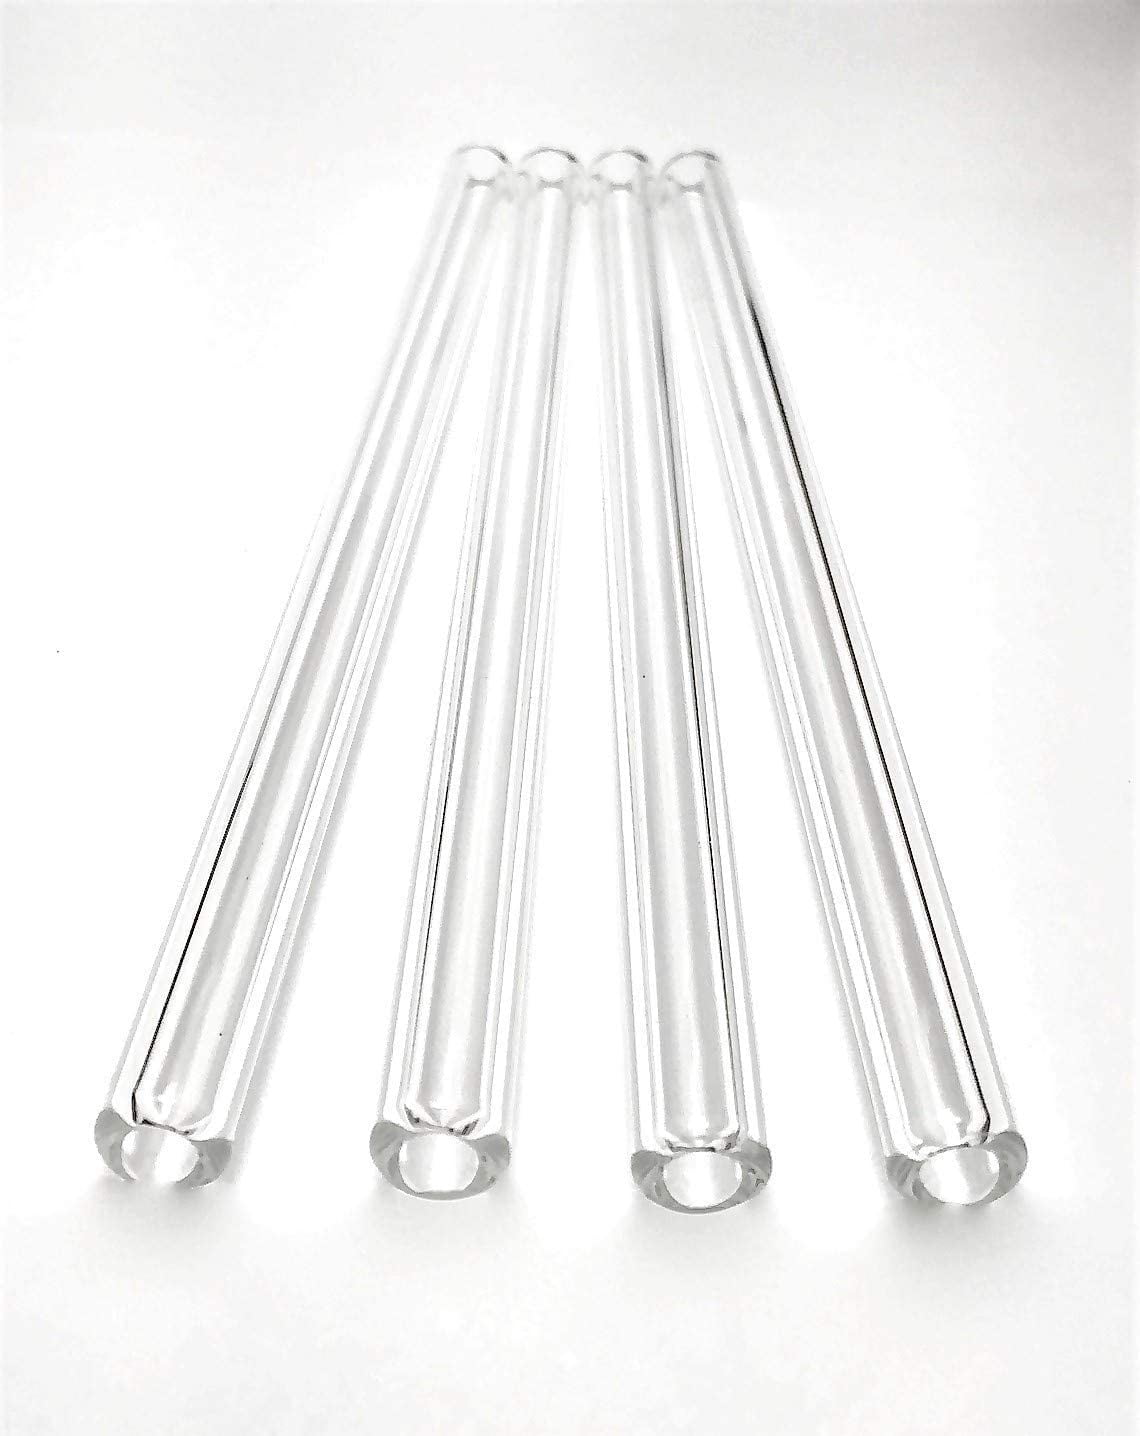 Four Clear Glass Pyrex Drinking Straws with Cleaning Brush by Thestrazspot 